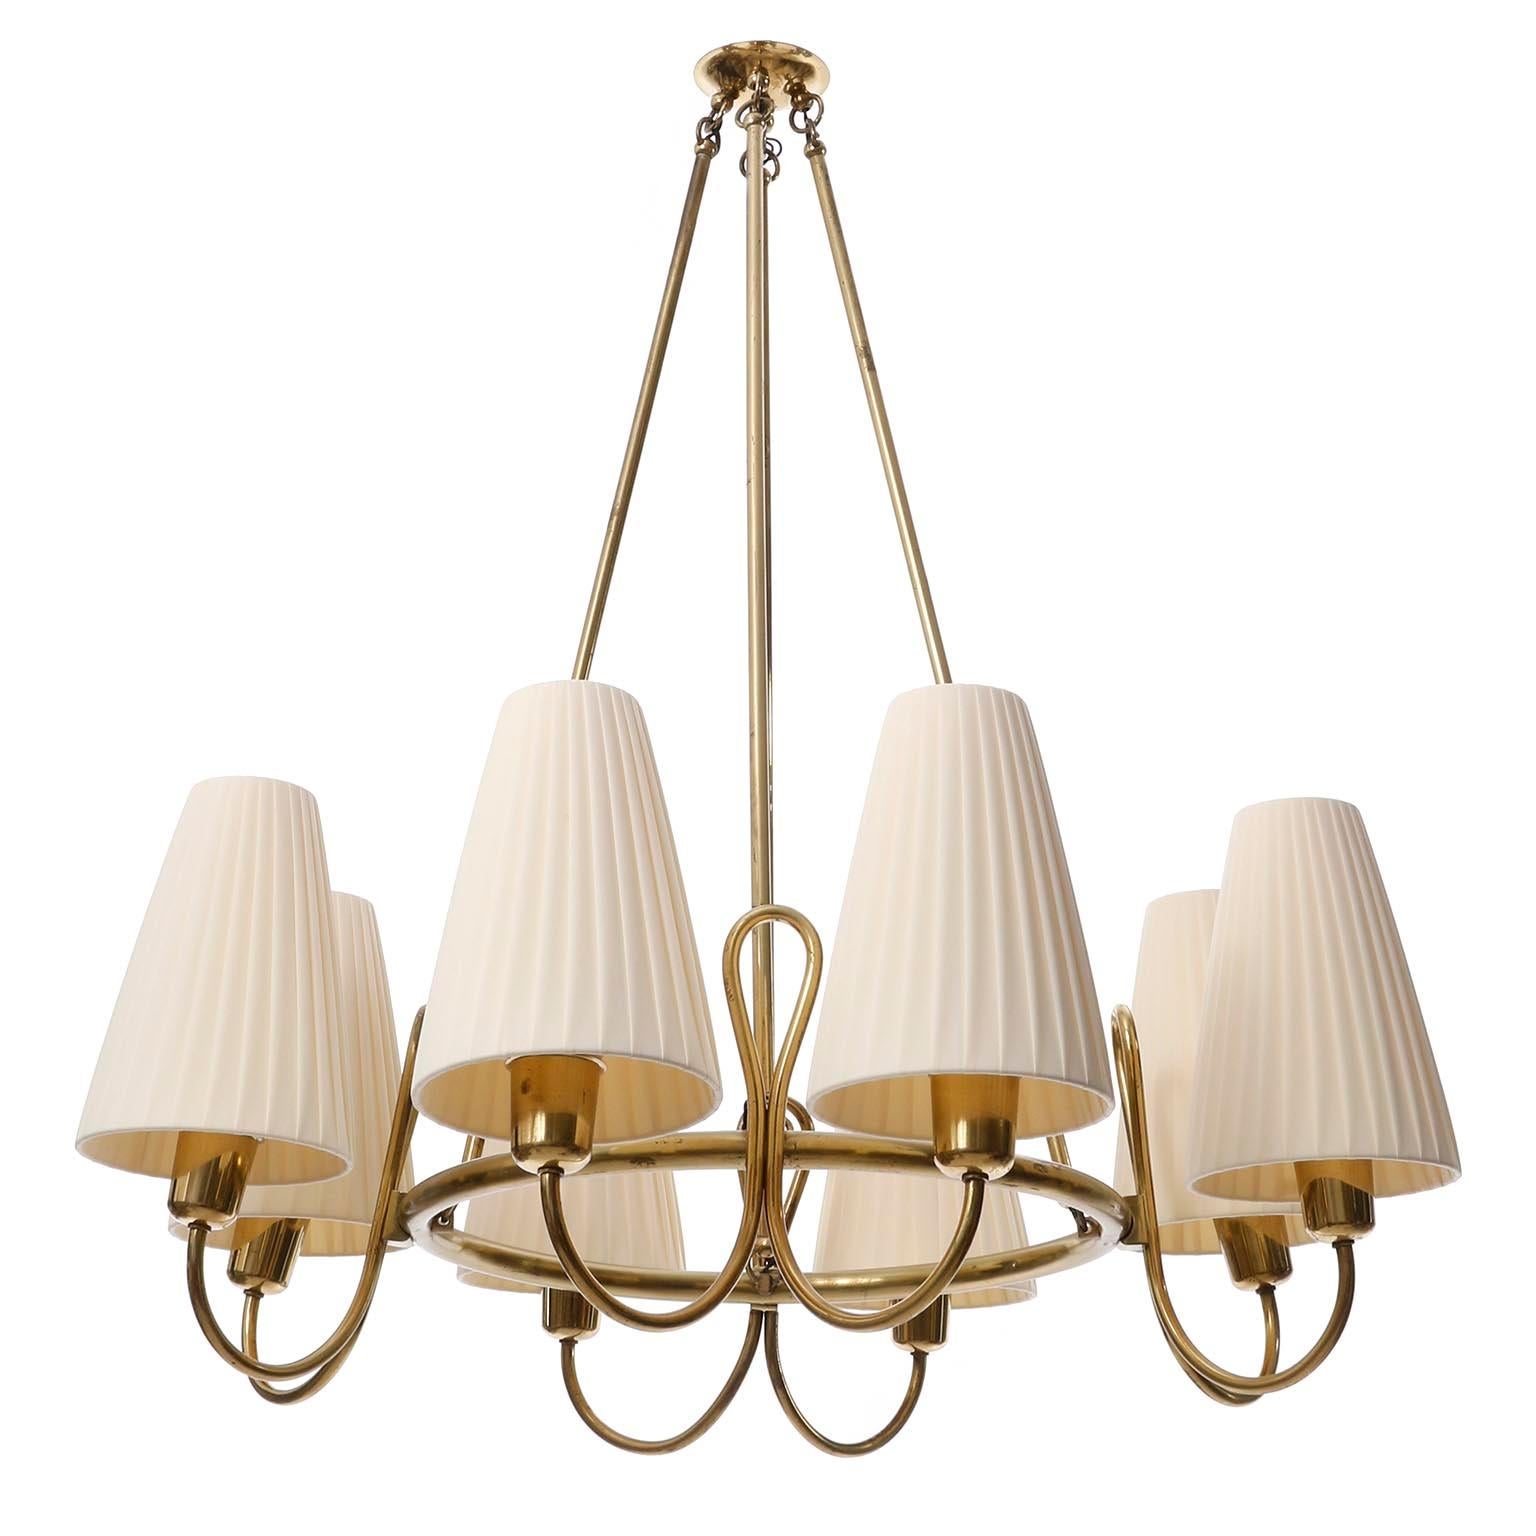 Polished Large Art Deco Chandelier, Brass Pleated Cream Fabric Shades, 1930s